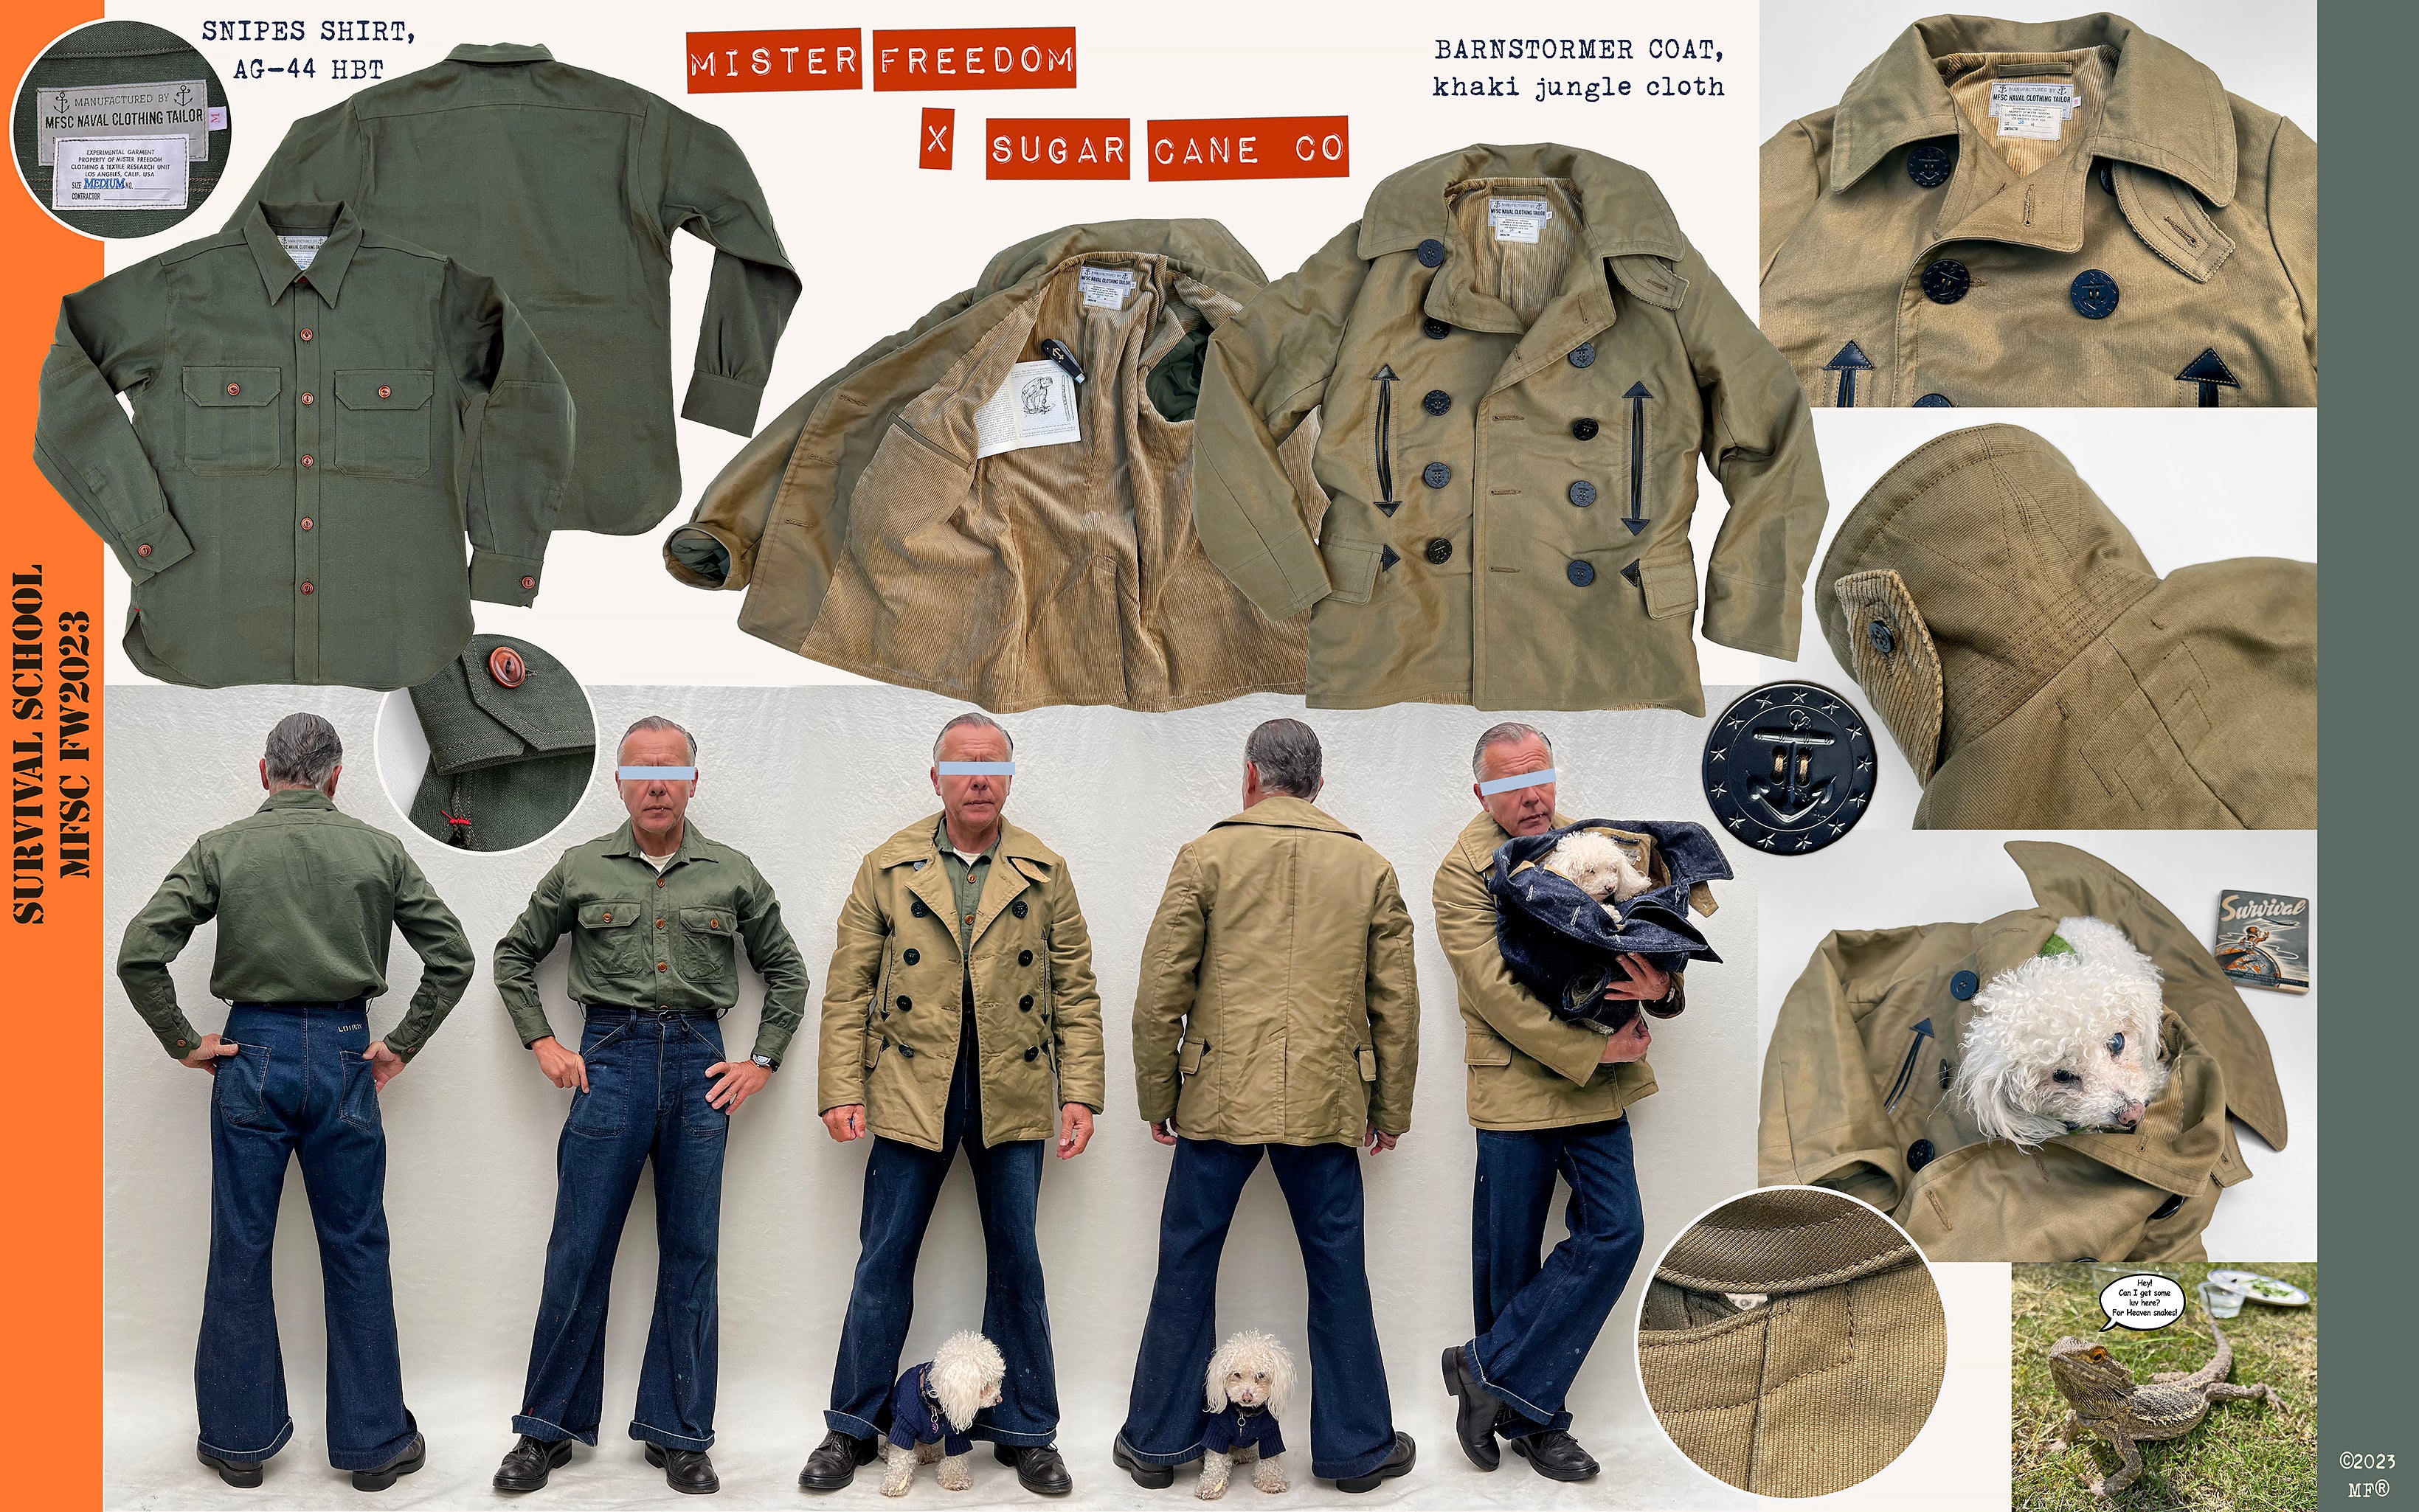 Mister Freedom® x Sugar Cane msfc FW2023 LookBook Preview, “Survival S